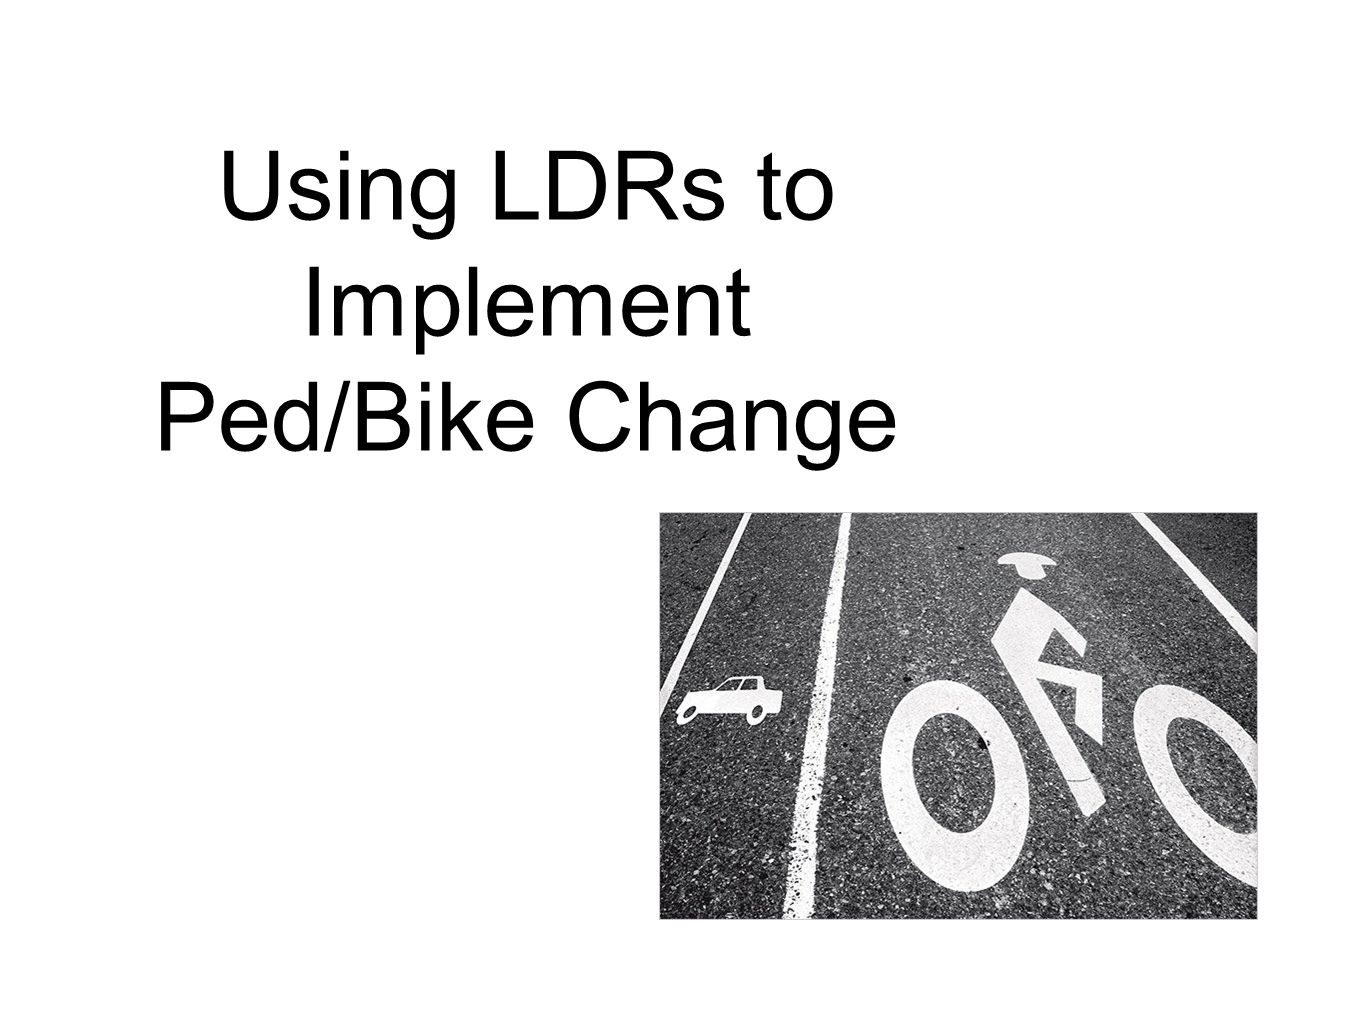 Using LDRs to Implement Ped/Bike Change